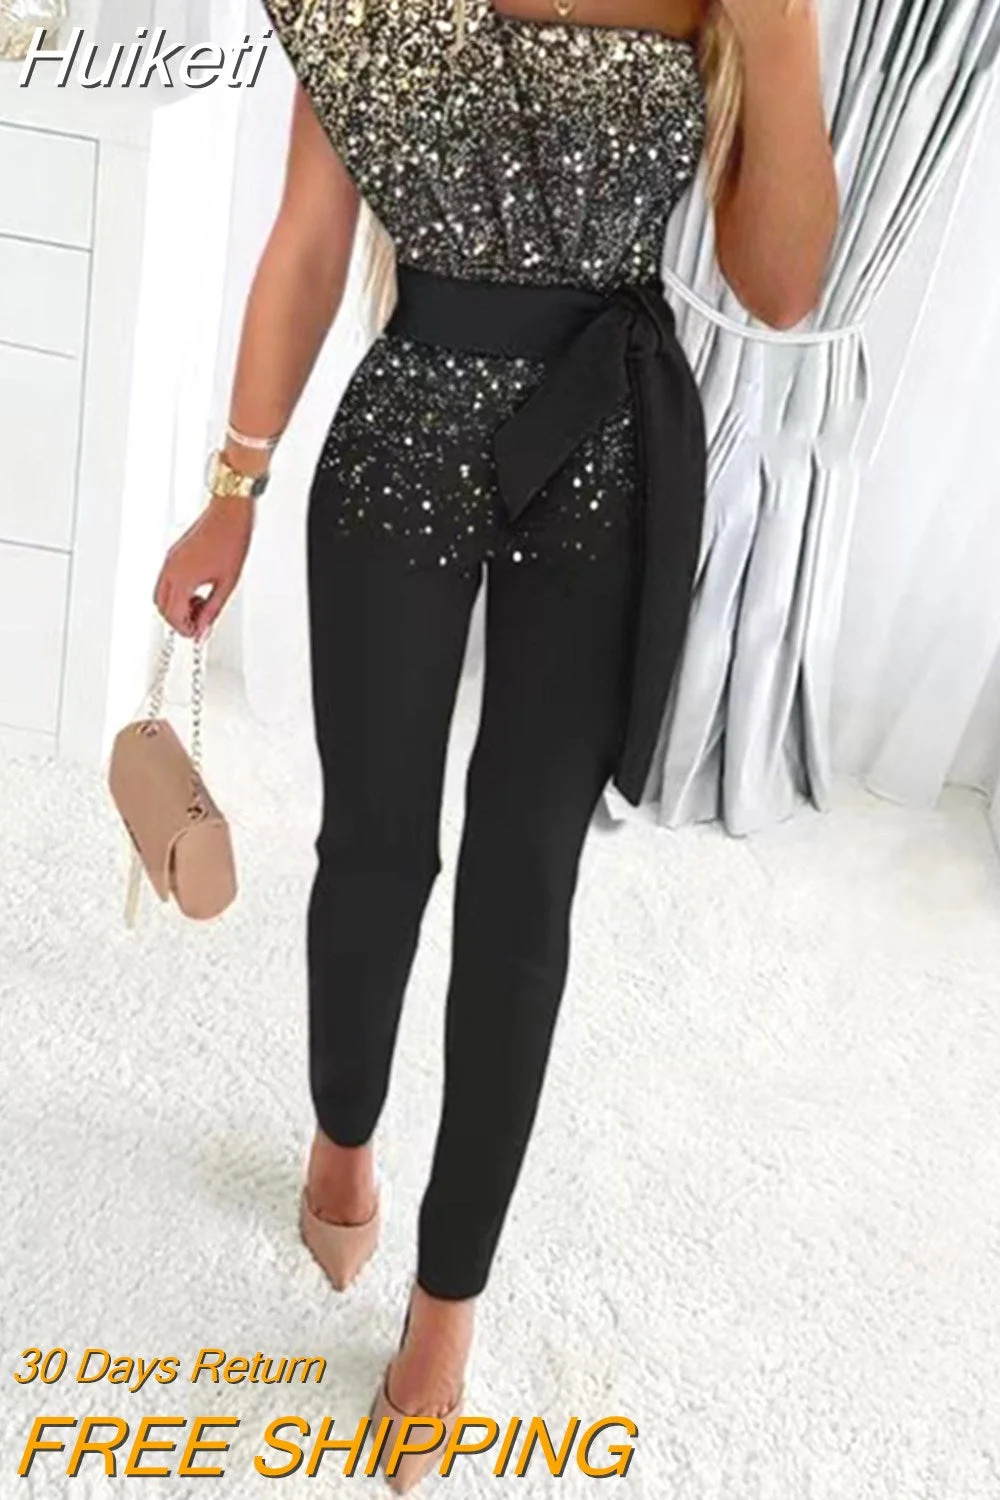 Huiketi Sequins Patchwork Short Sleeve Slim Bodycon Outfits Jumpsuit Women Lady Elegant Sexy One Piece Party Overalls